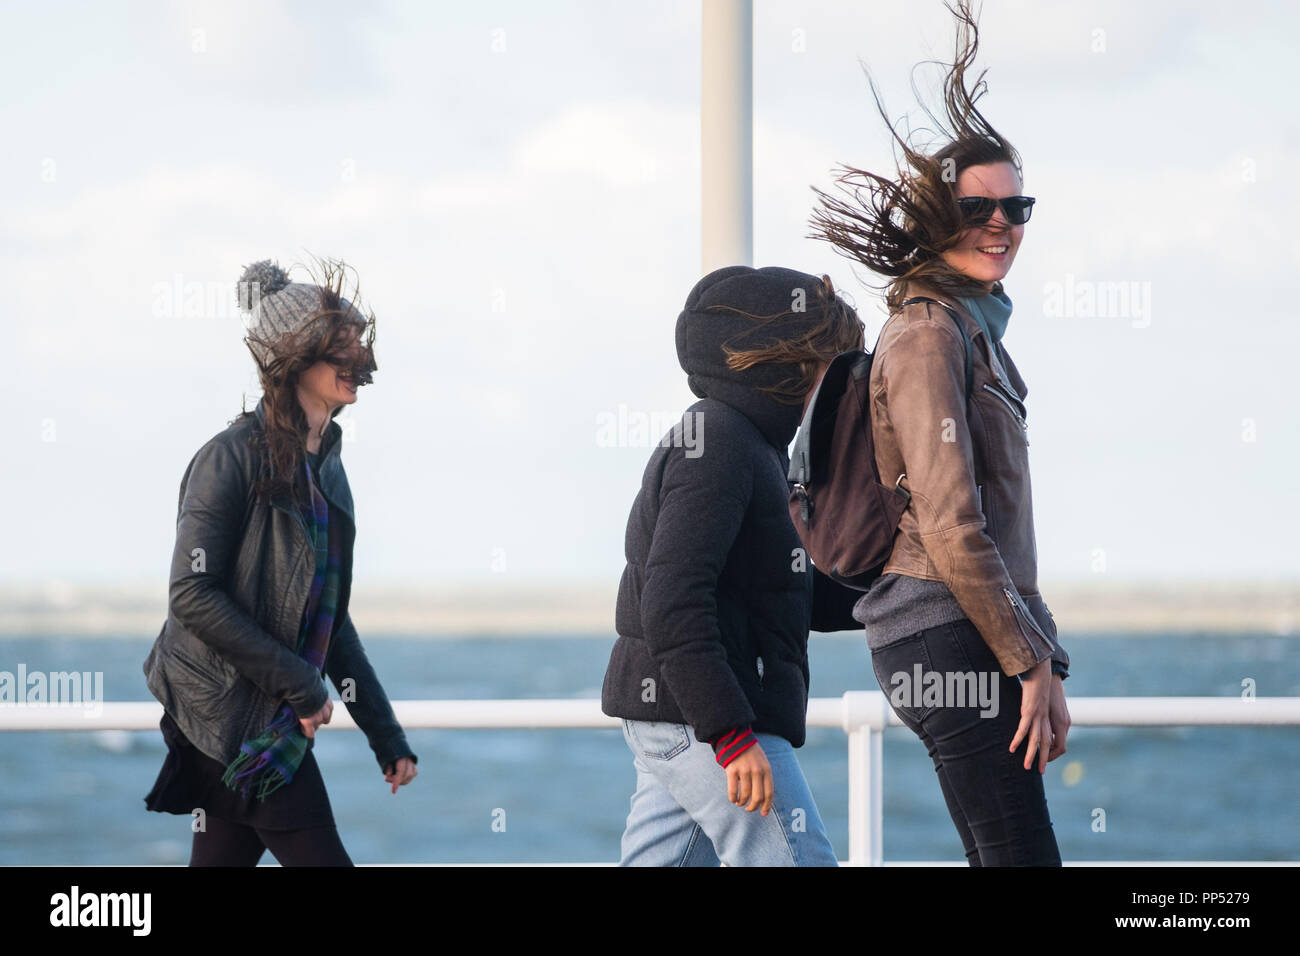 Aberystwyth, Wales, UK. Sunday 23rd Sept 2018.   UK Weather:  People walking along the promenade are windswept buffeted by the strong winds on a sunny but  blustery Equinox Sunday afternoon in Aberystwyth on the west wales coast.  Today is the last day of Astronomical Summer - when the days and night are of equal lengths. From tomorrow the nights are longer than the days, marking  the onset of Astronomical Winter in the northern hemisphere Photo © Keith Morris / Alamy Live News Stock Photo